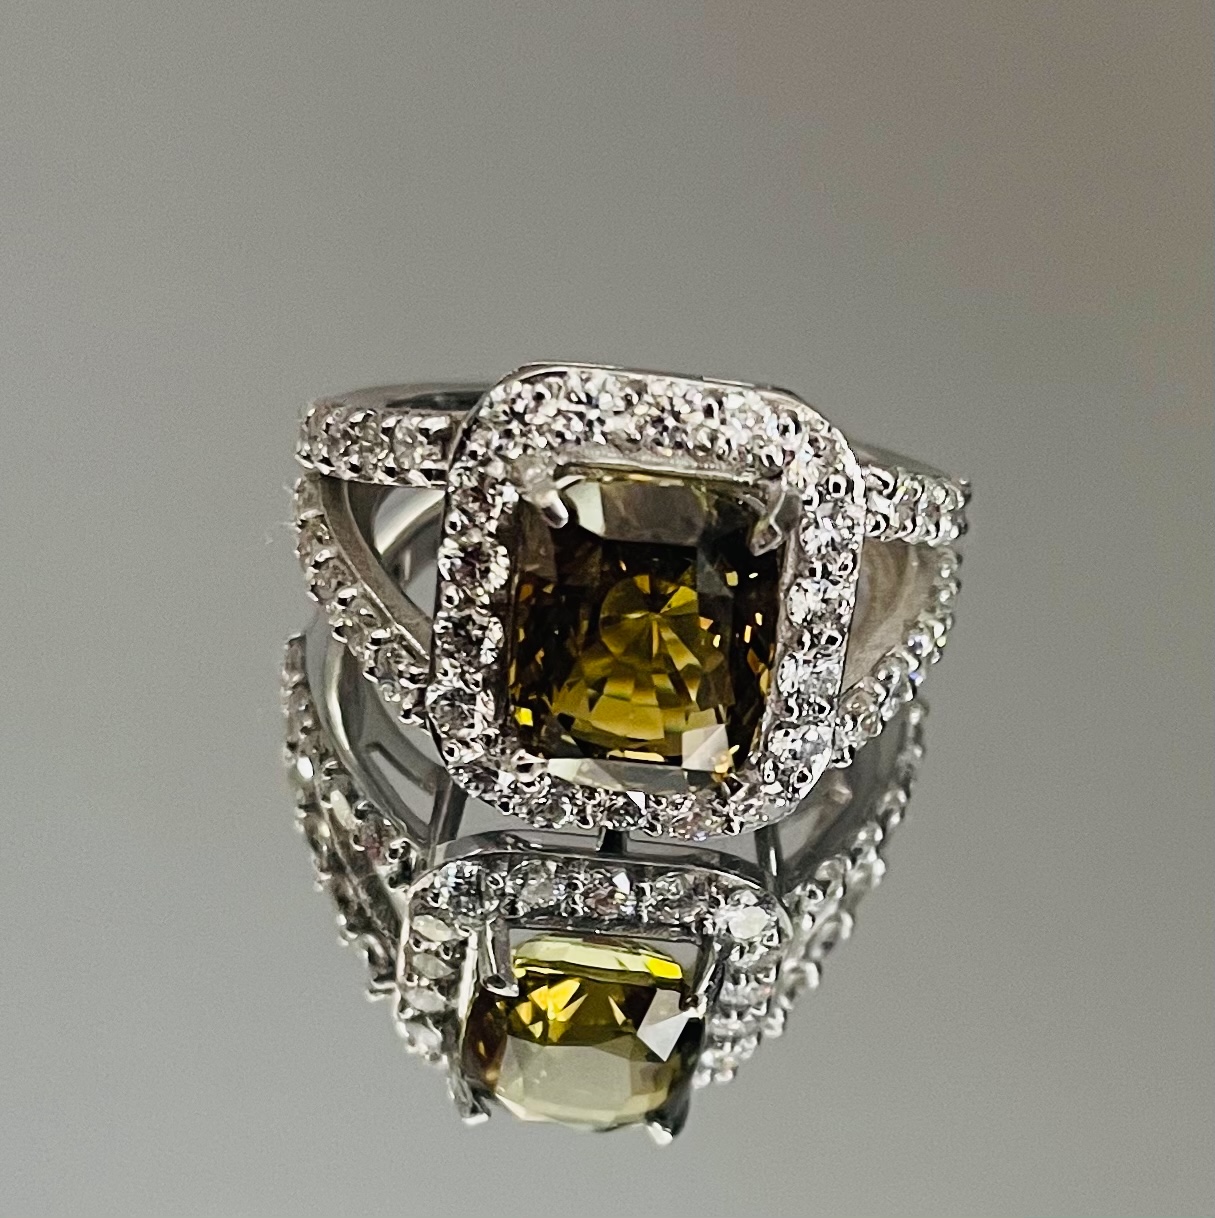 4.17Ct Natural Alexandrite Ring Unheated/Untreated with Diamonds & 18k Gold - Image 2 of 9